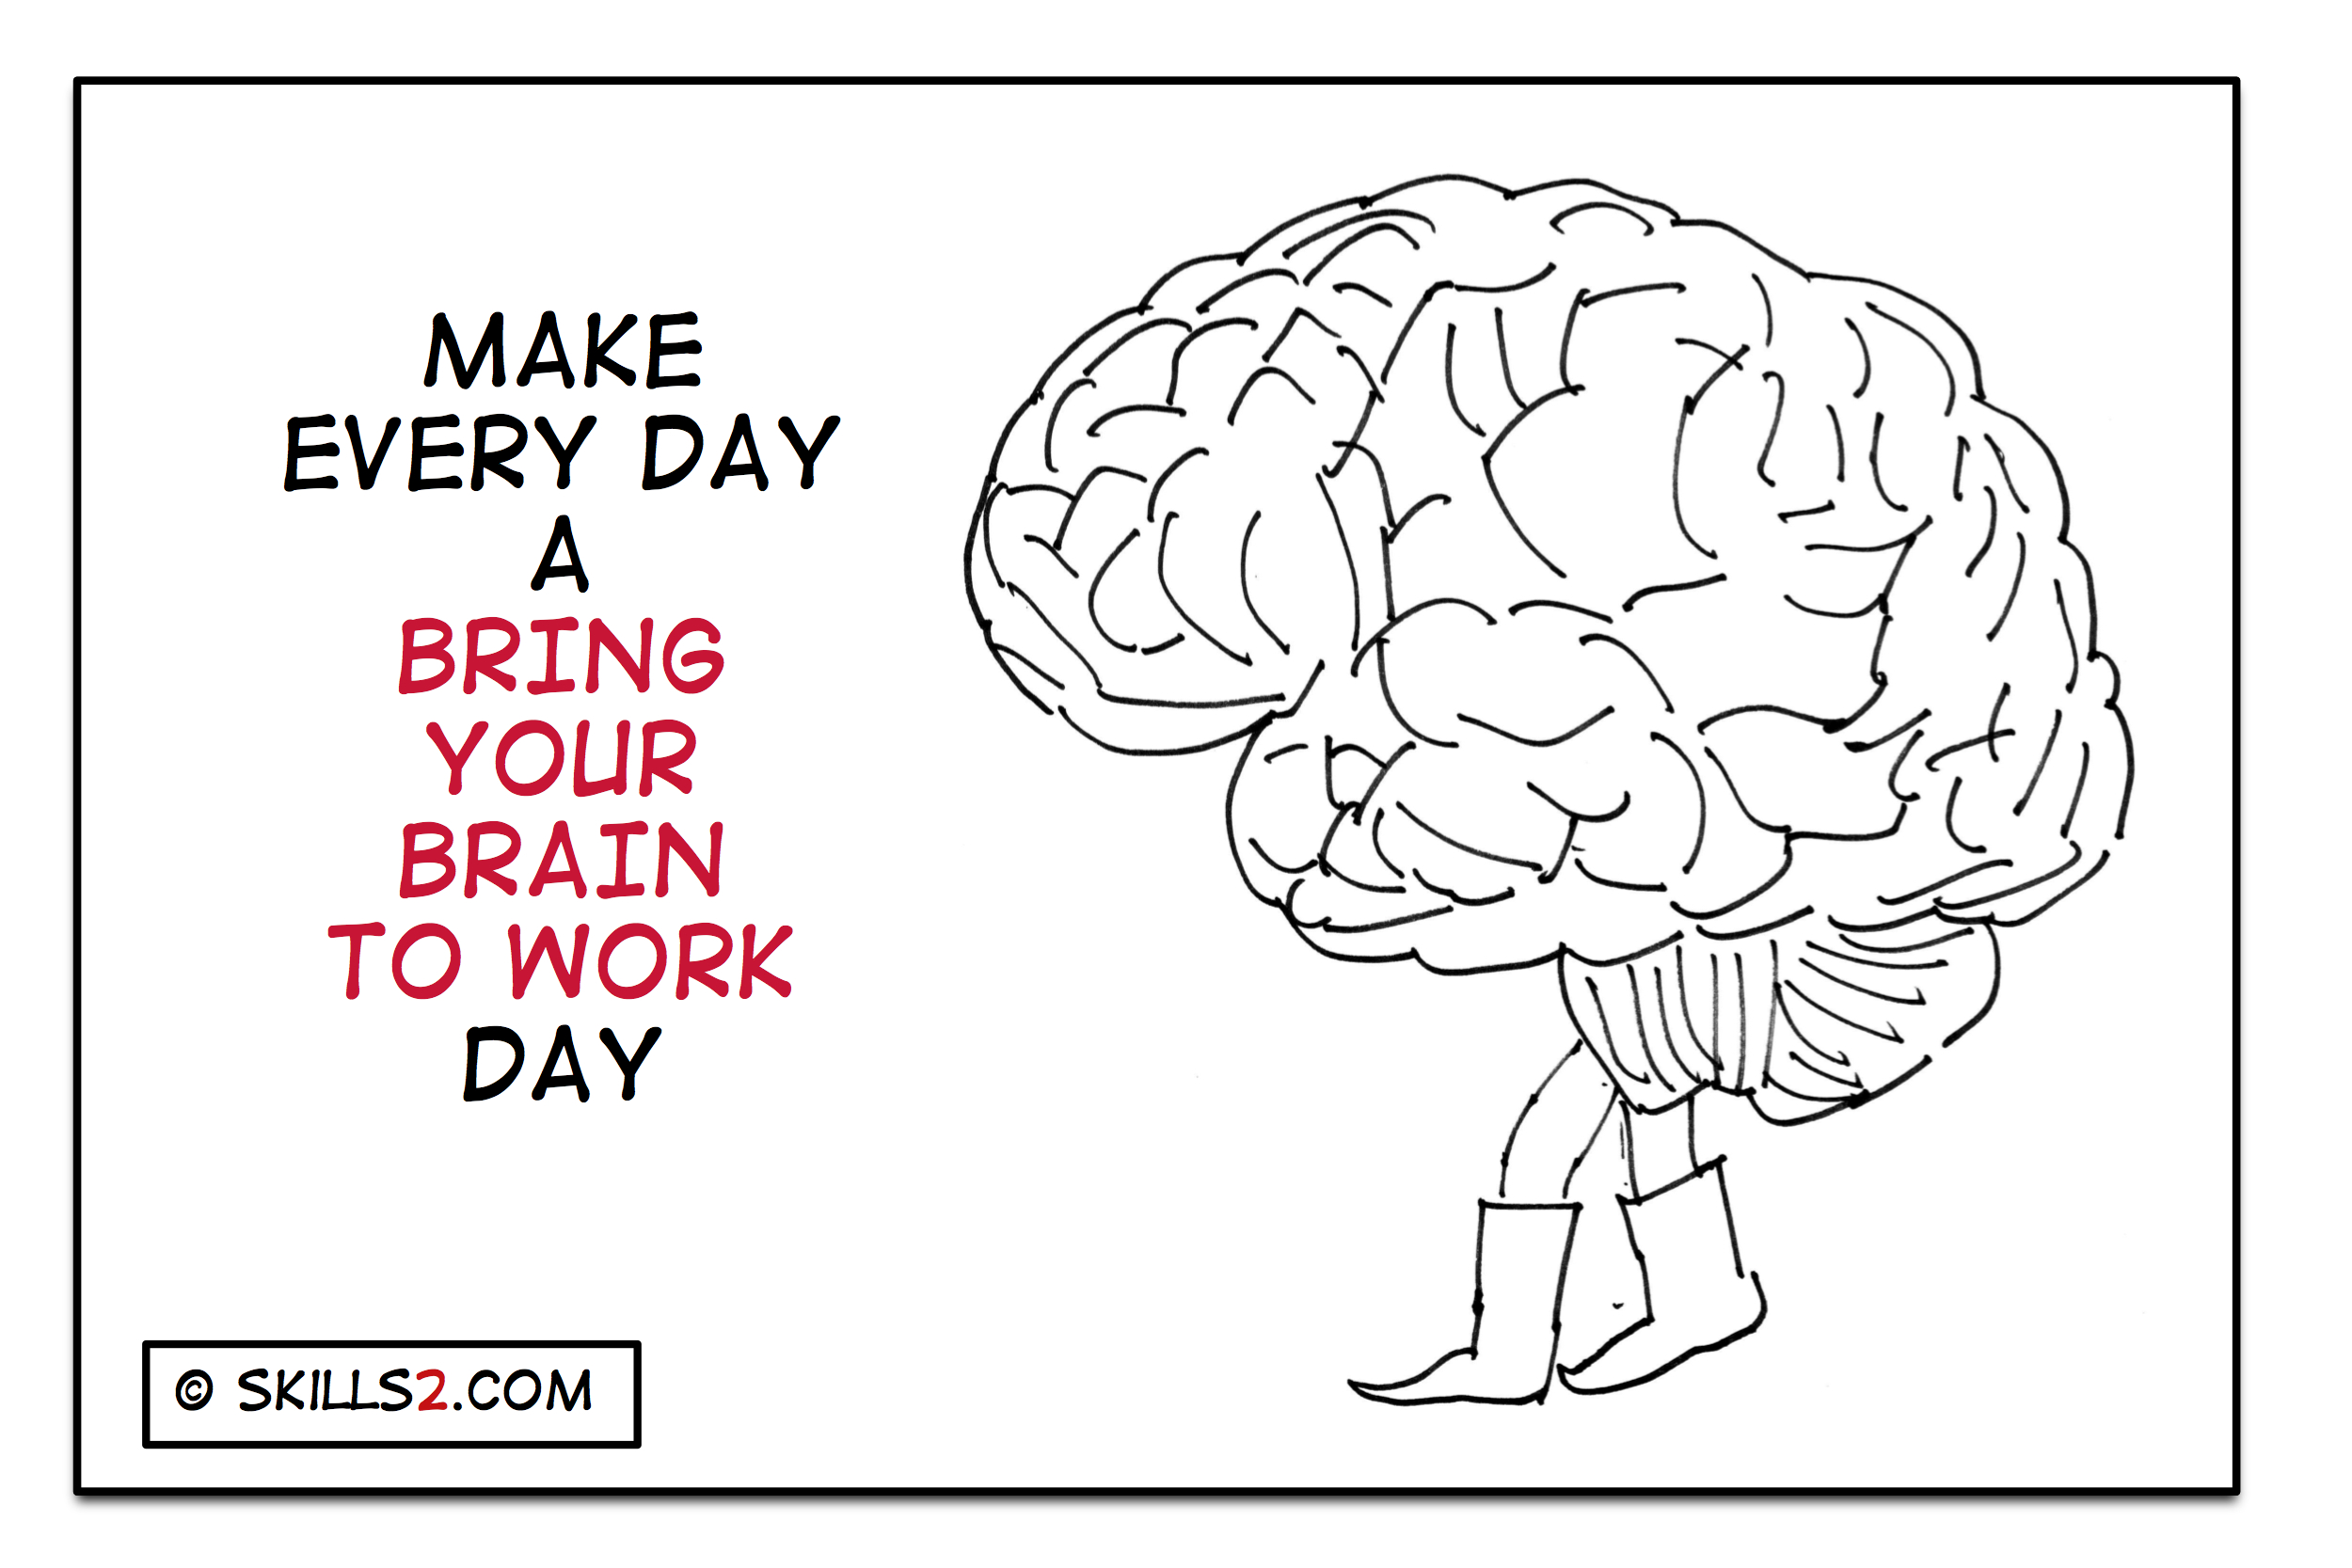 Bring your brain to work